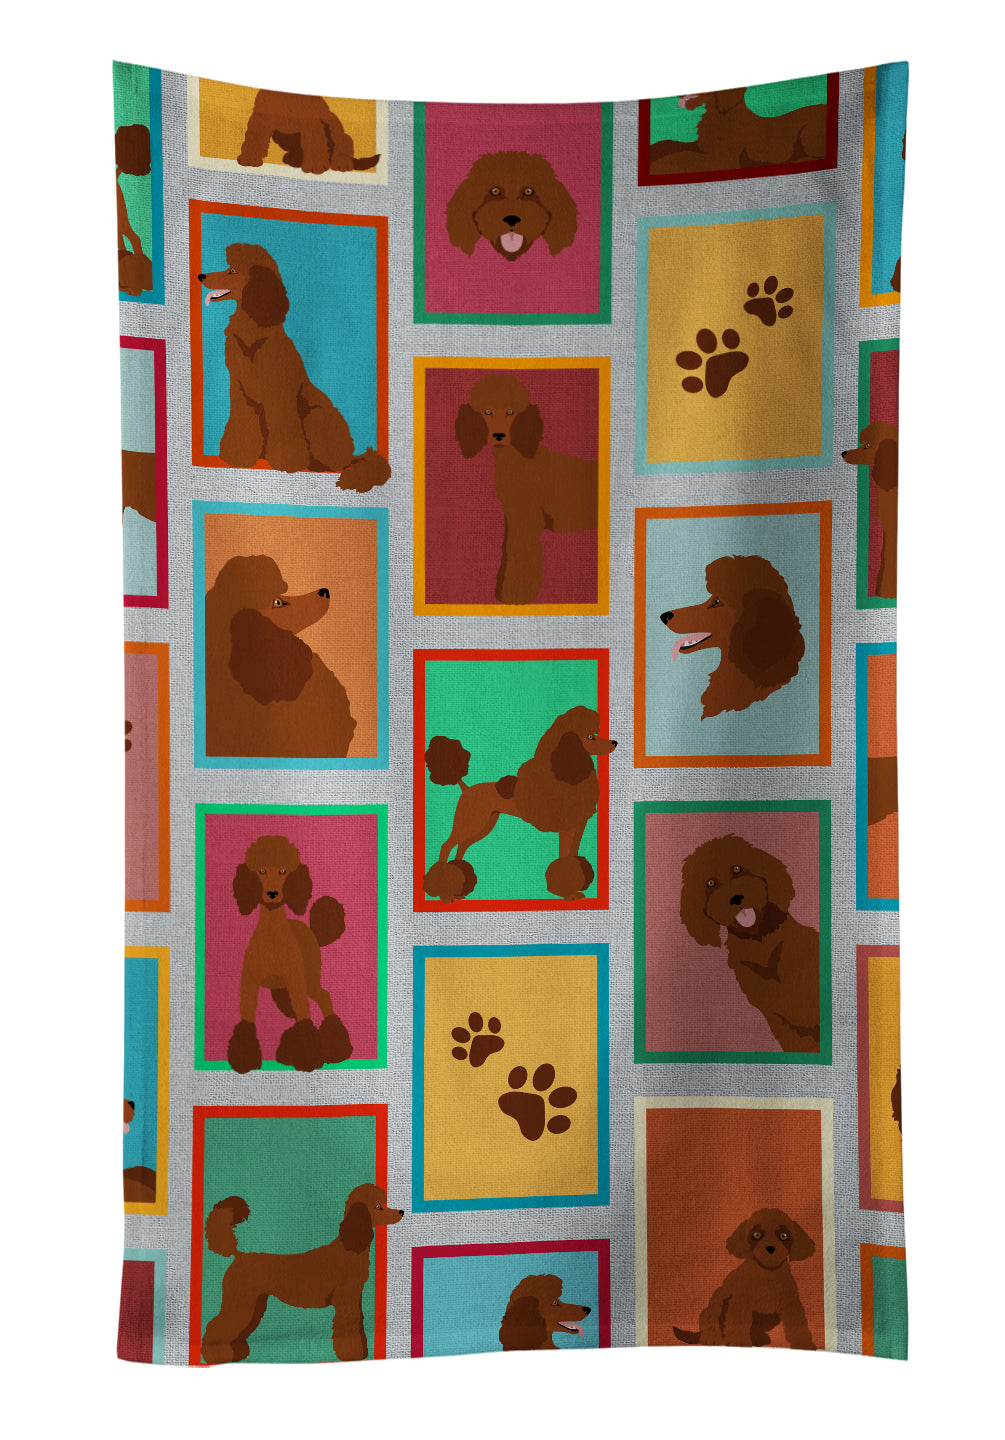 Buy this Lots of Chocolate Standard Poodle Kitchen Towel